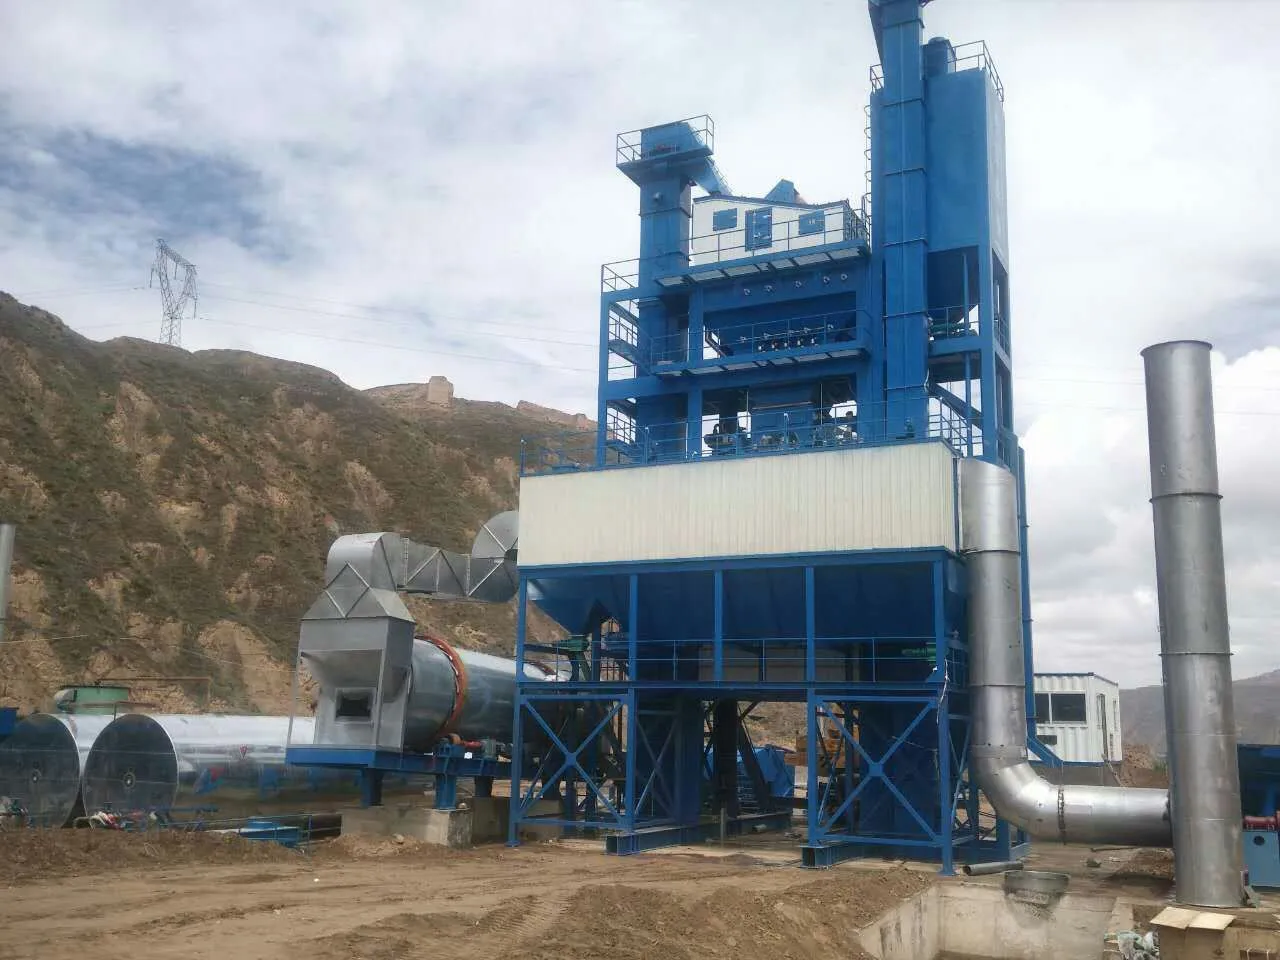 What is the function of asphalt mixing plant?